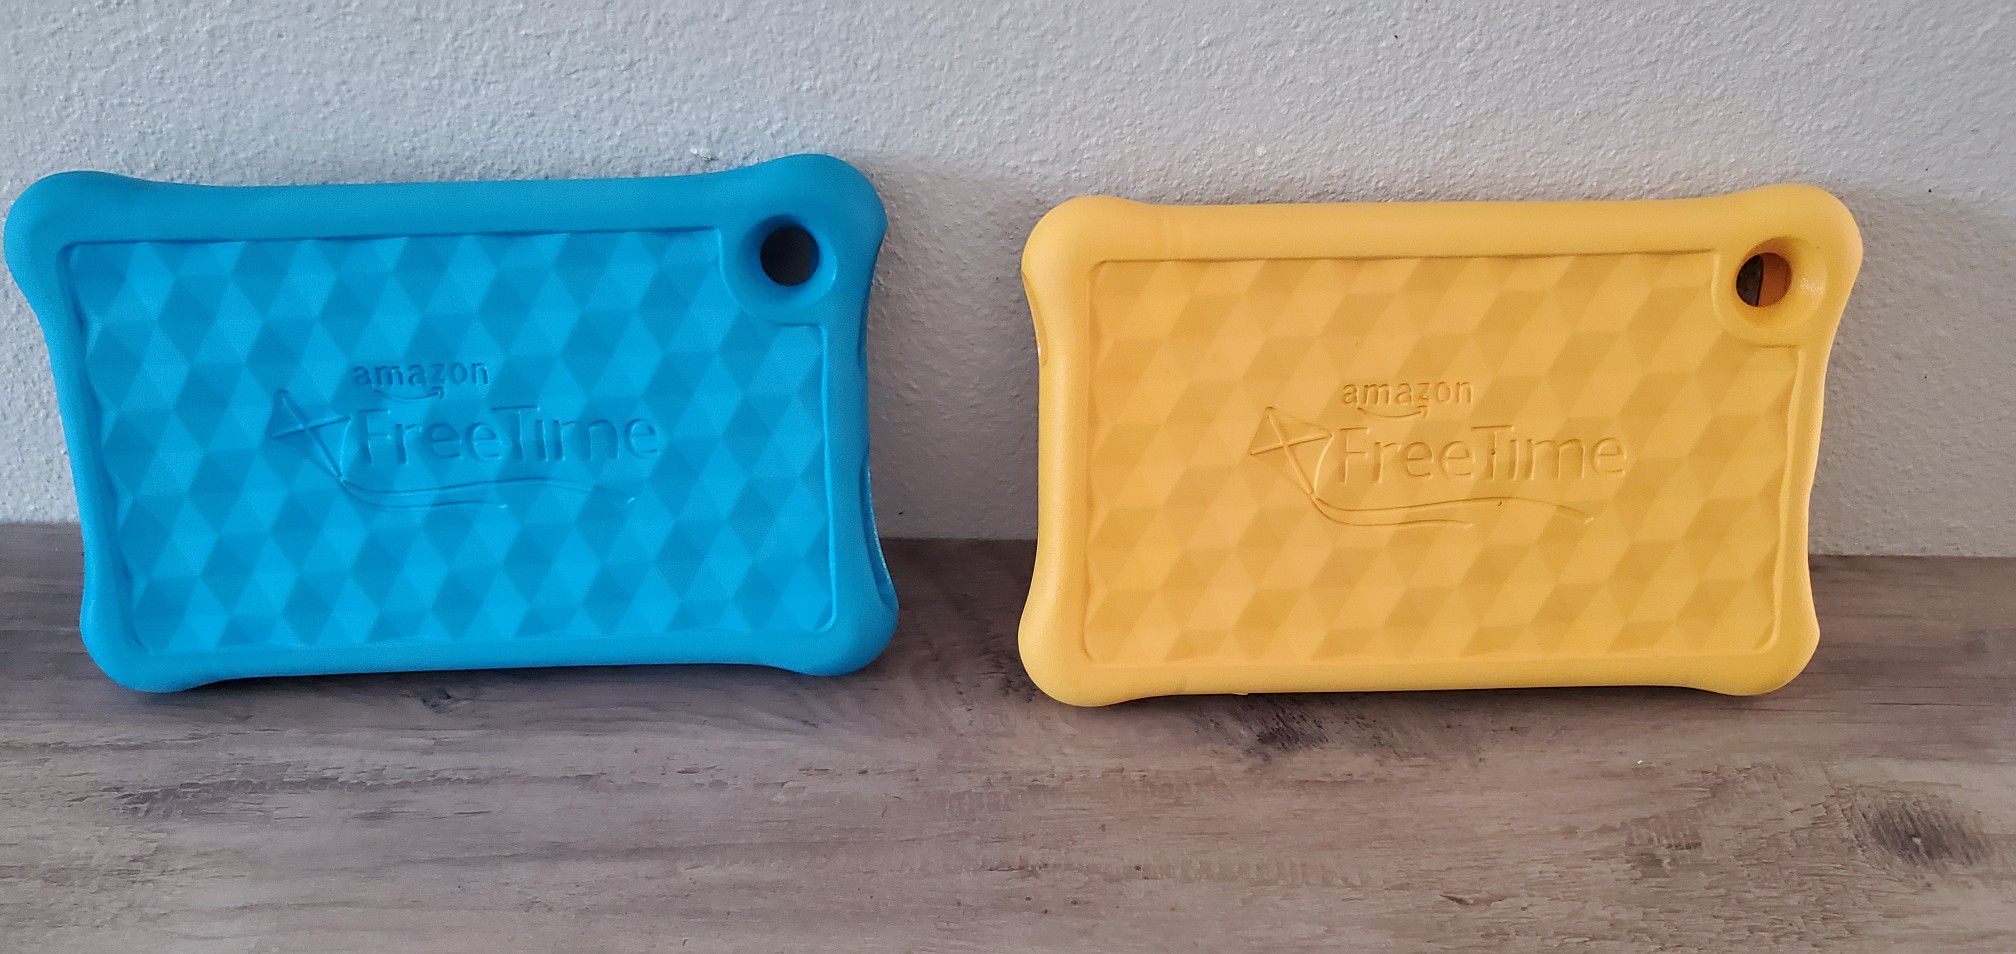 Kid-Proof Cases for Amazon Fire HD 8 Tablet